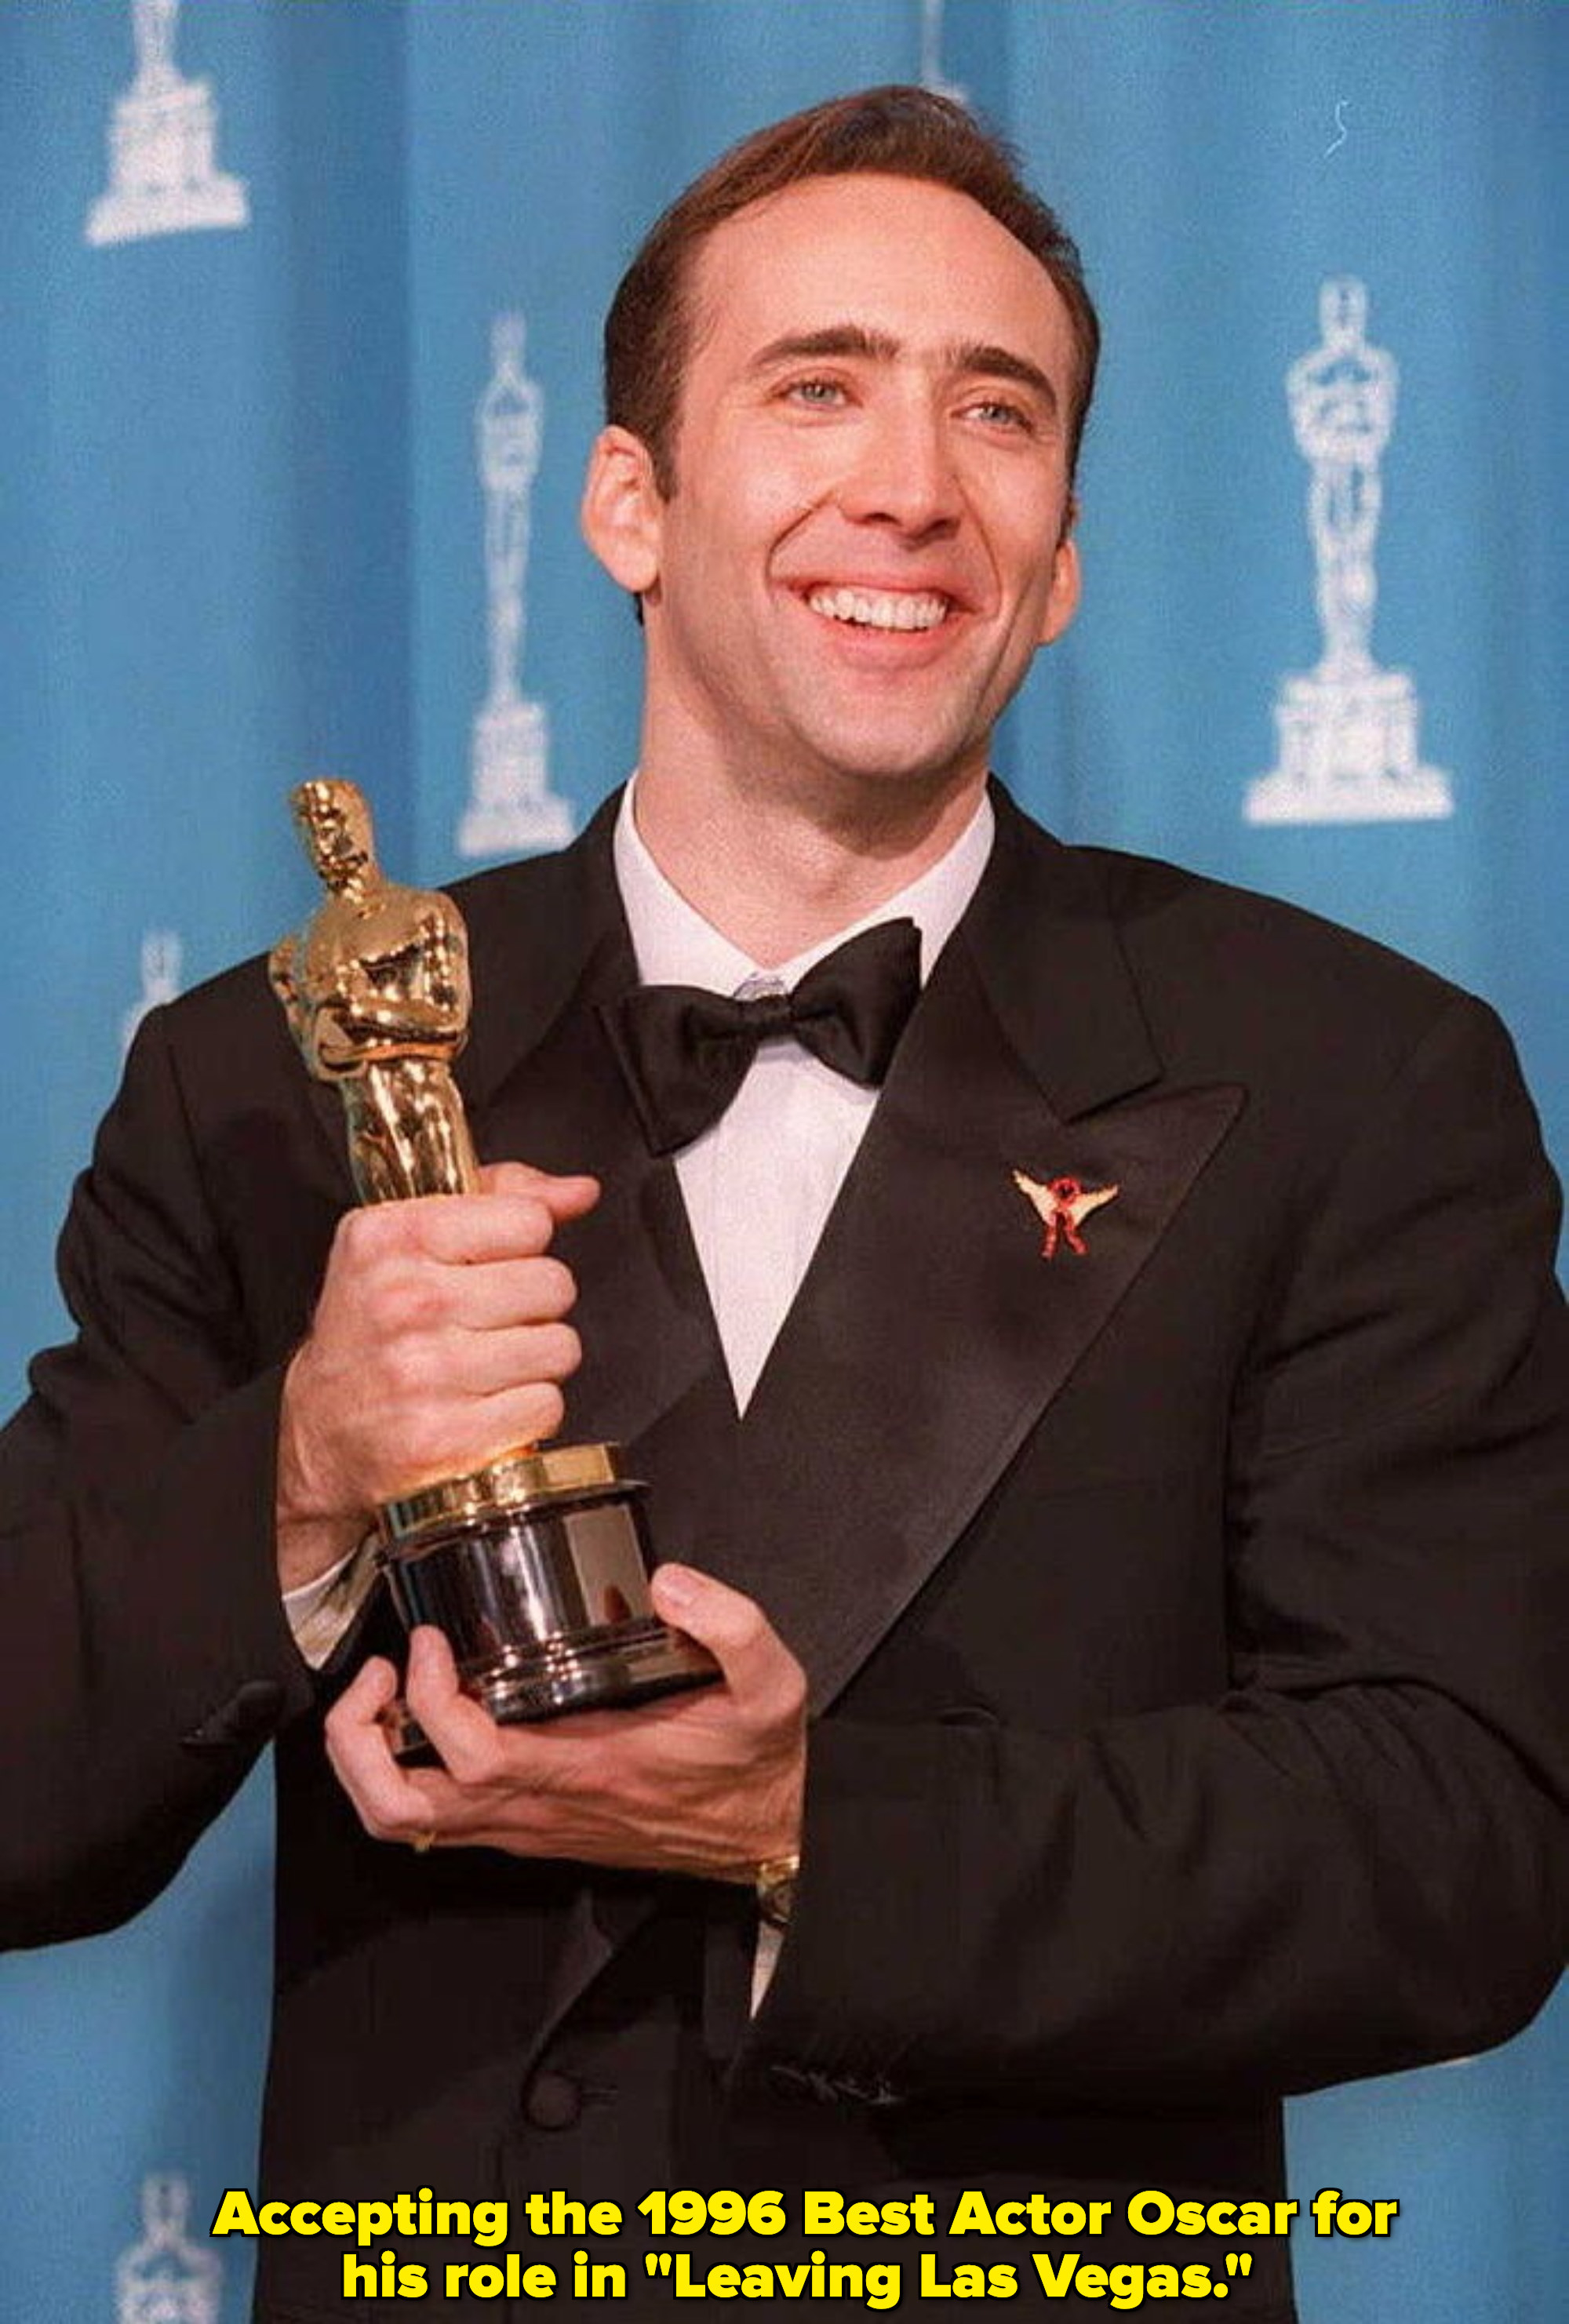 Nicolas Cage smiles and holds up an Oscar